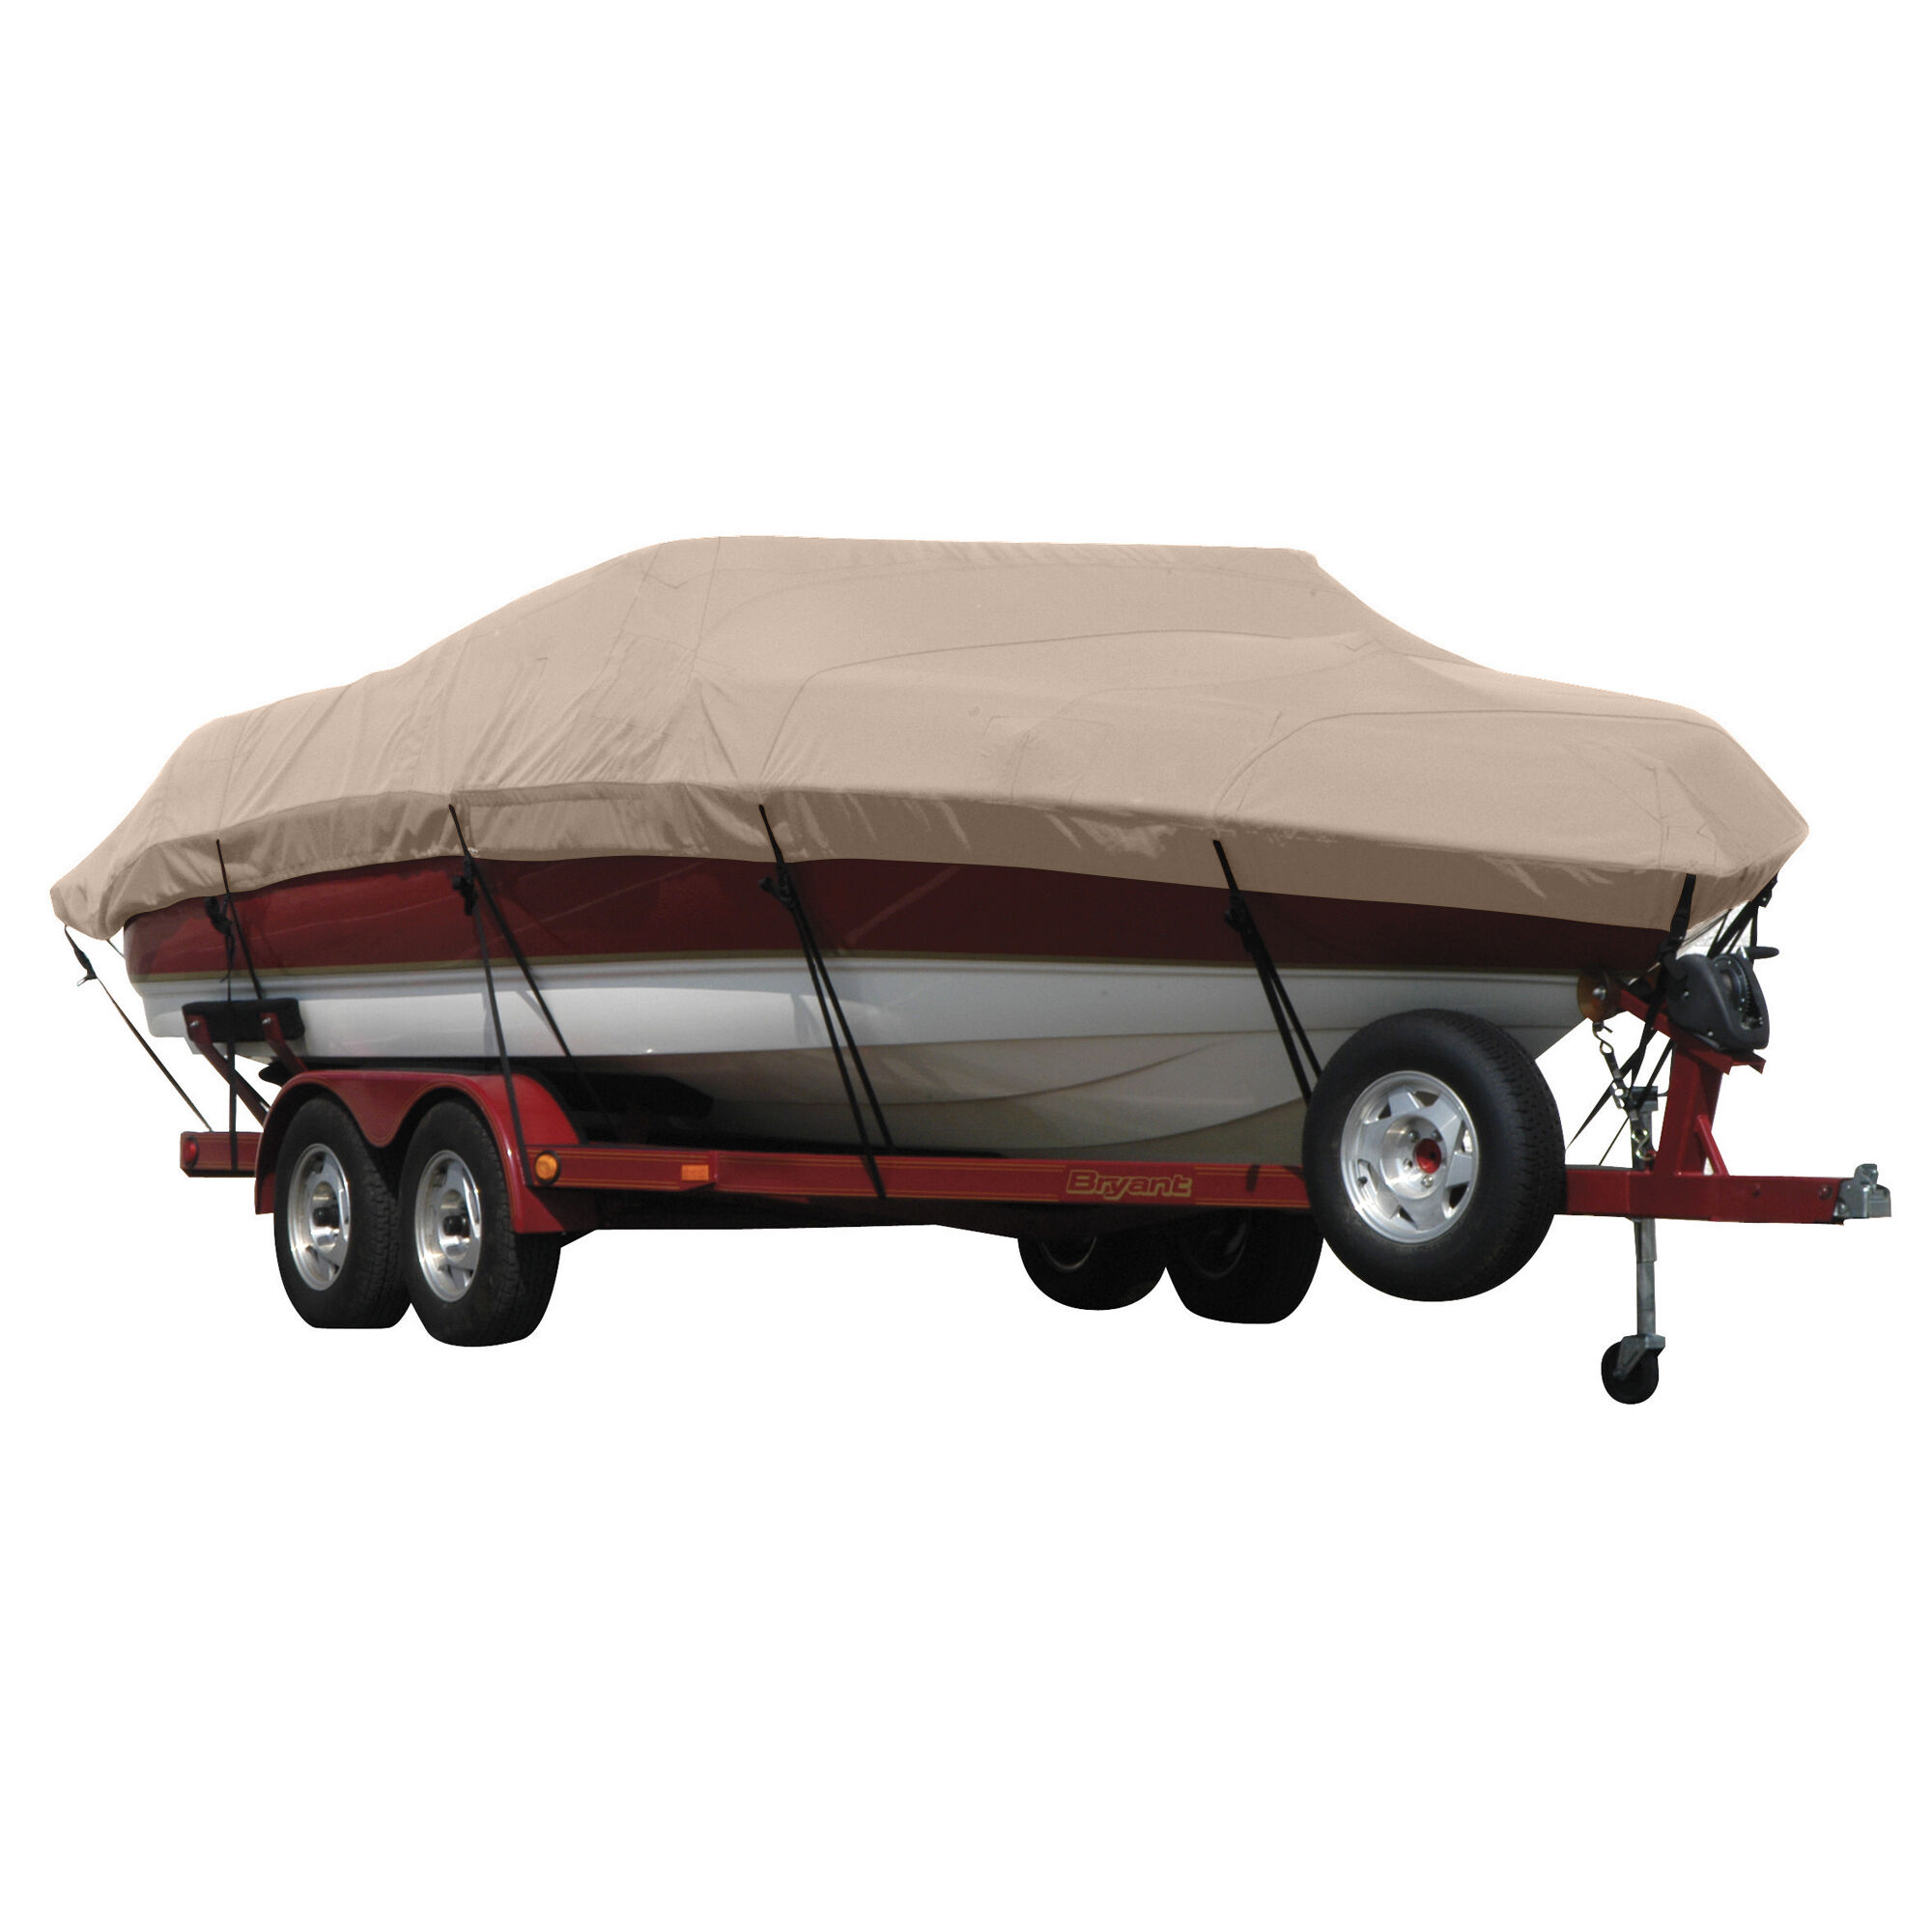 Covermate Exact Fit Sunbrella Boat Cover for Bayliner Classic 2452 Cd Classic 2452 Cd Hard Top I/O. Linnen in Linen